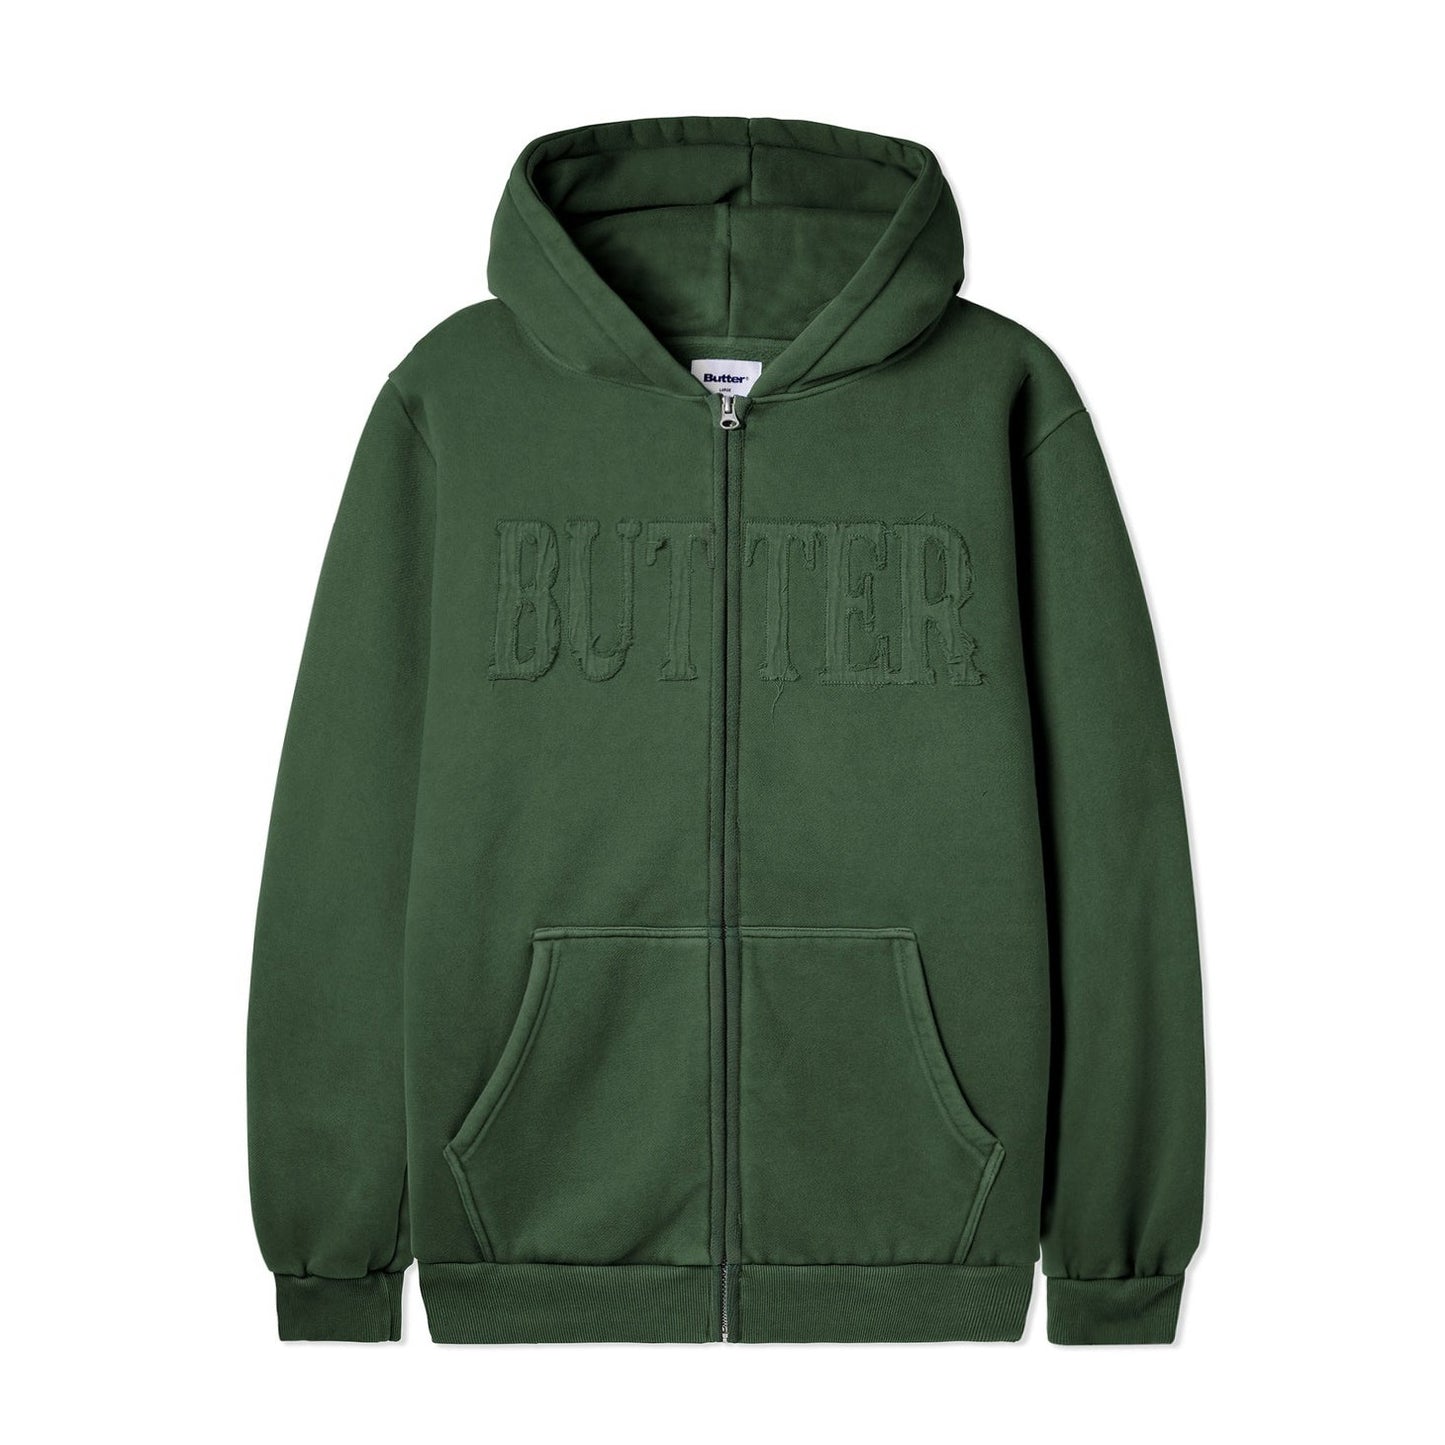 Butter Goods Fabric Applique Zip Hoodie Washed Army